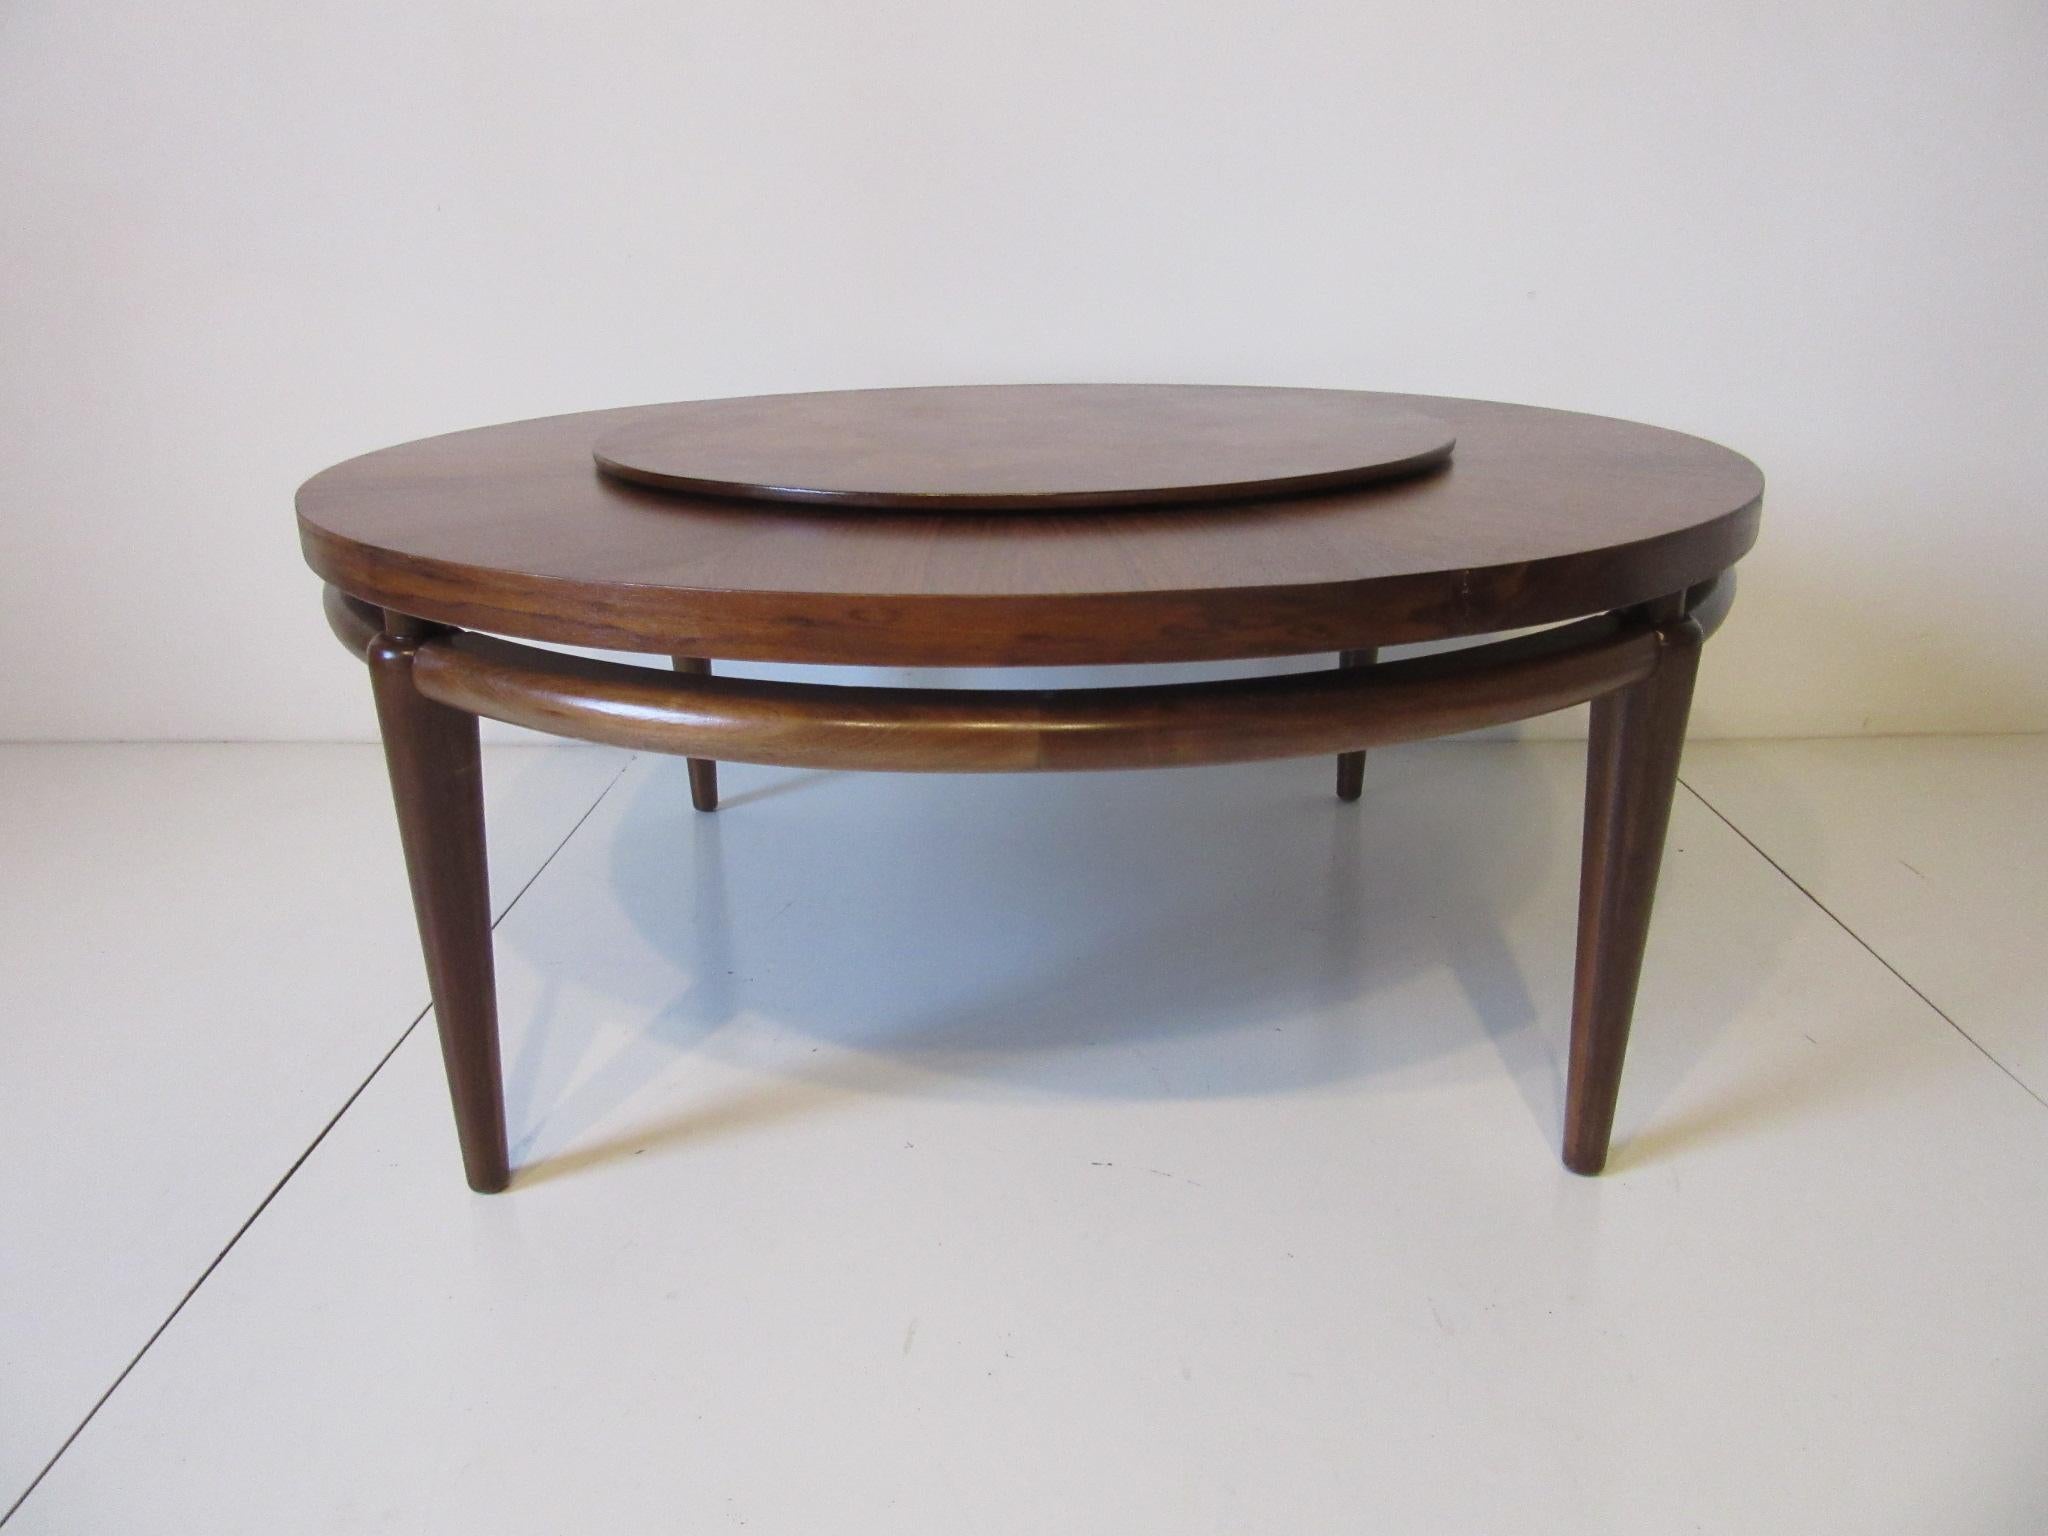 A well crafted walnut coffee table with bookmatched outer area and burl wood Lazy Susan styled center section. Below the top is a rounded stretcher and conical legs designed in the manner of T.H. Robsjohn - Gibbings. The tabletop measurement is 42